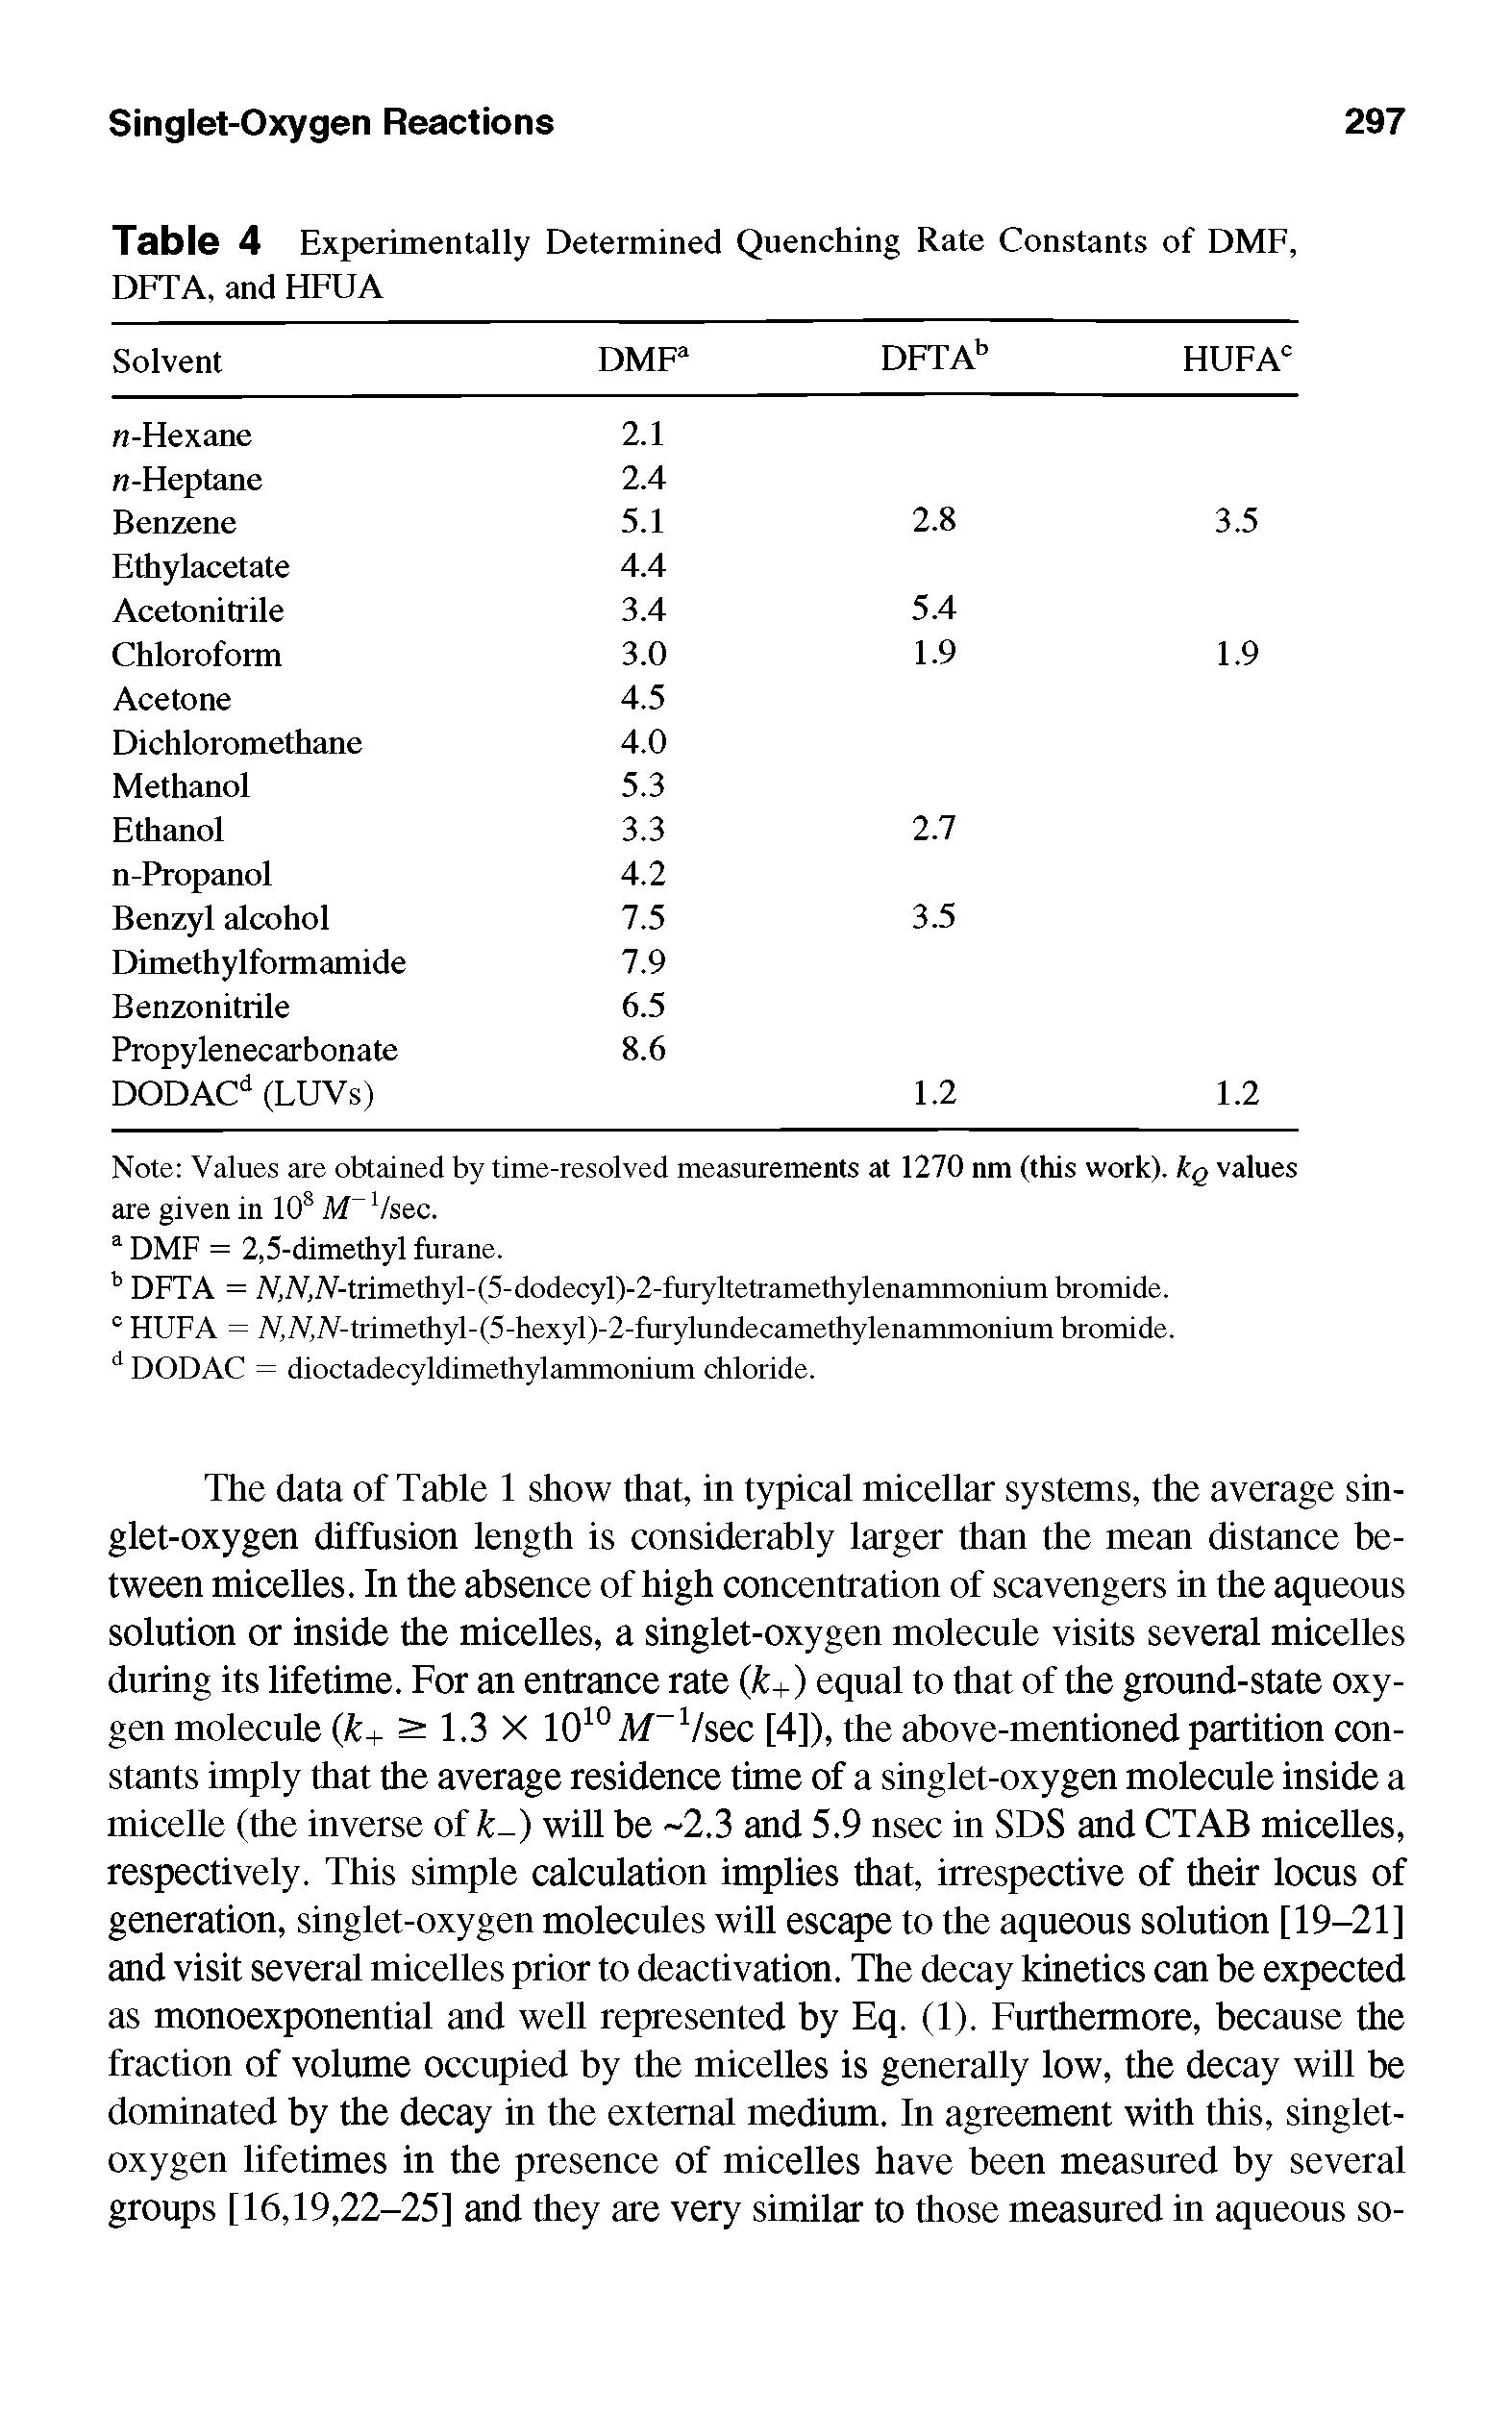 Table 4 Experimentally Determined Quenching Rate Constants of DMF, DFTA, and HFUA...